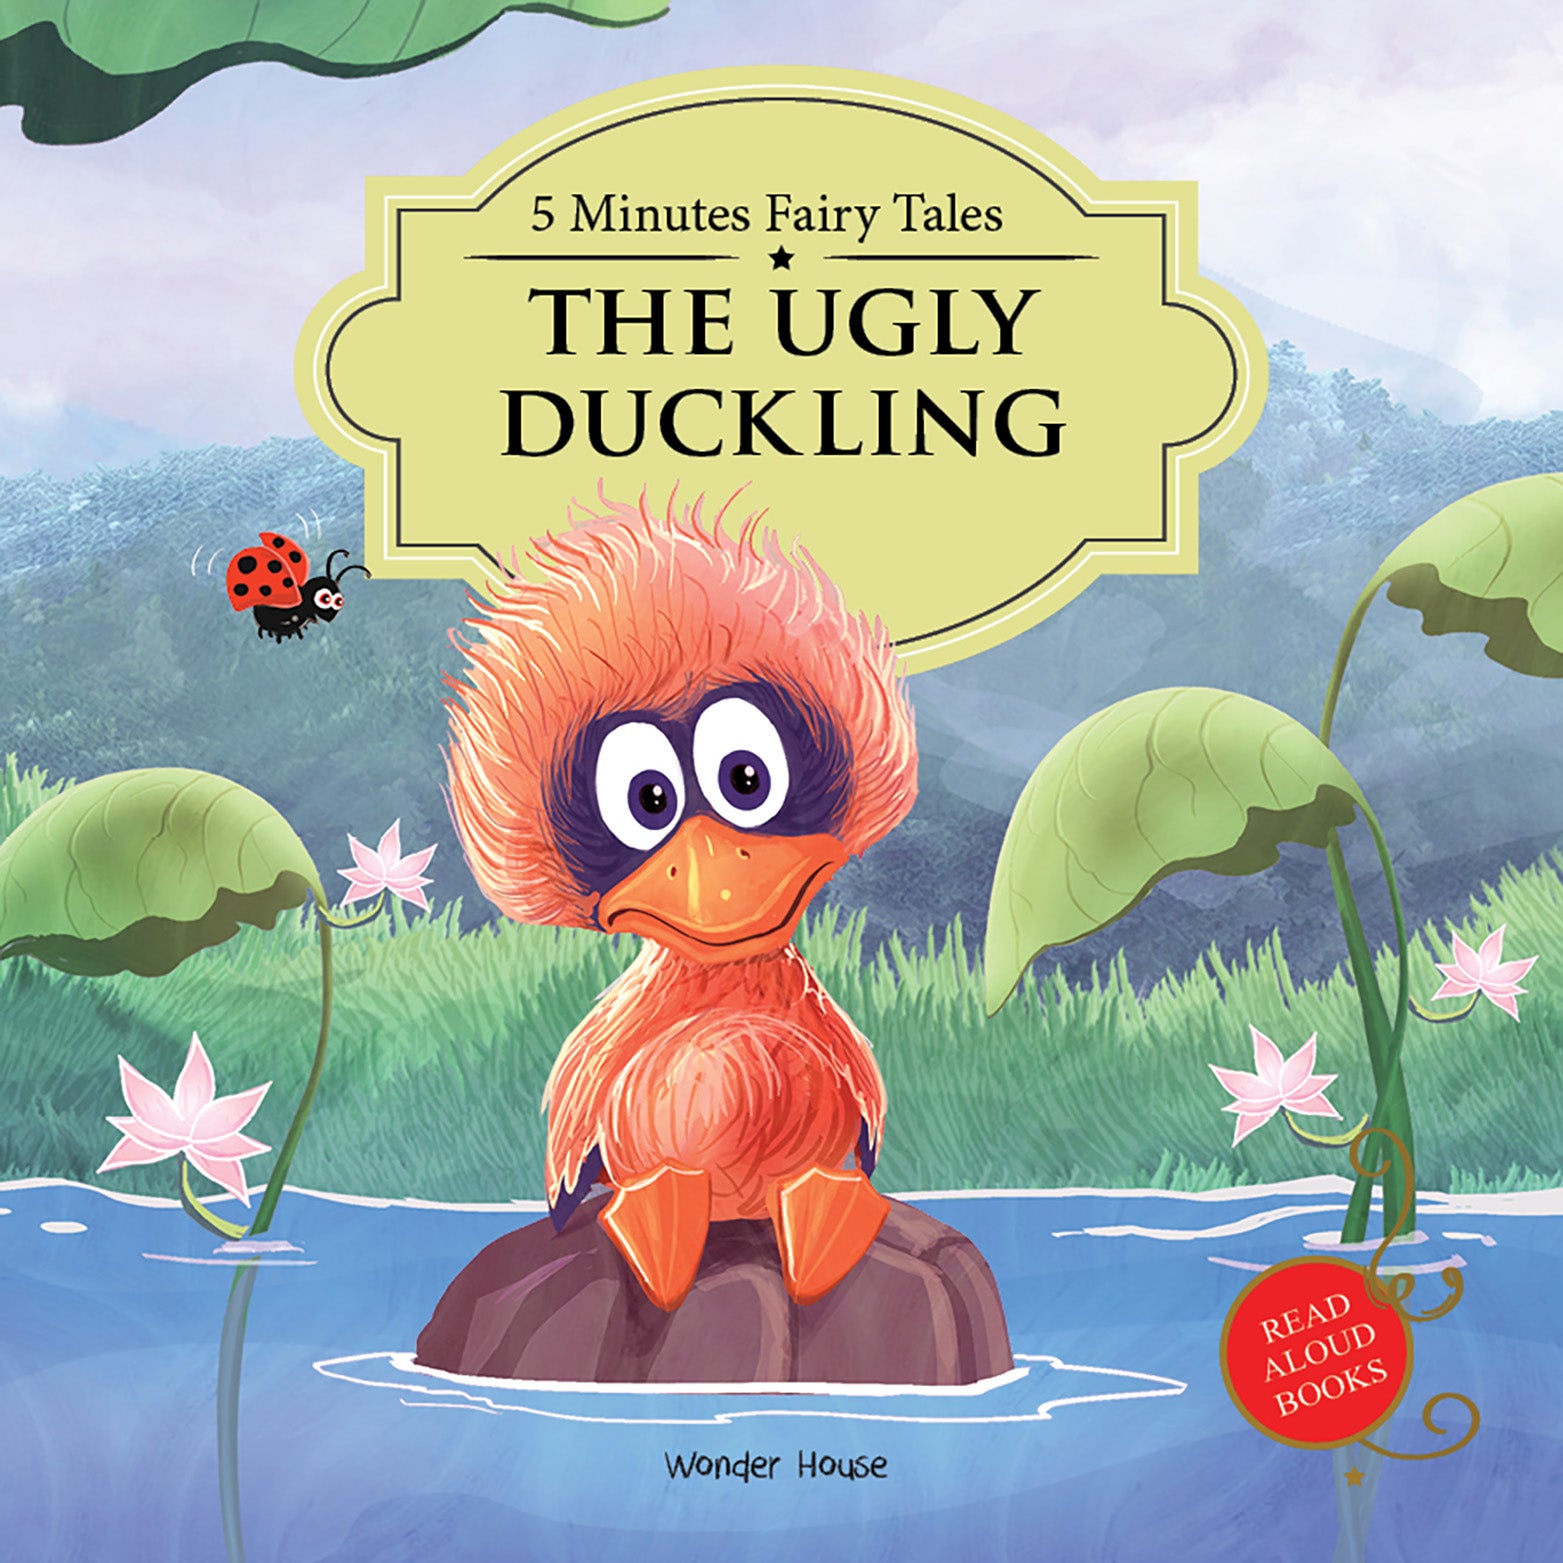 5 Minutes Fairy Tales The Ugly Duckling: Abridged Fairy Tales For Children